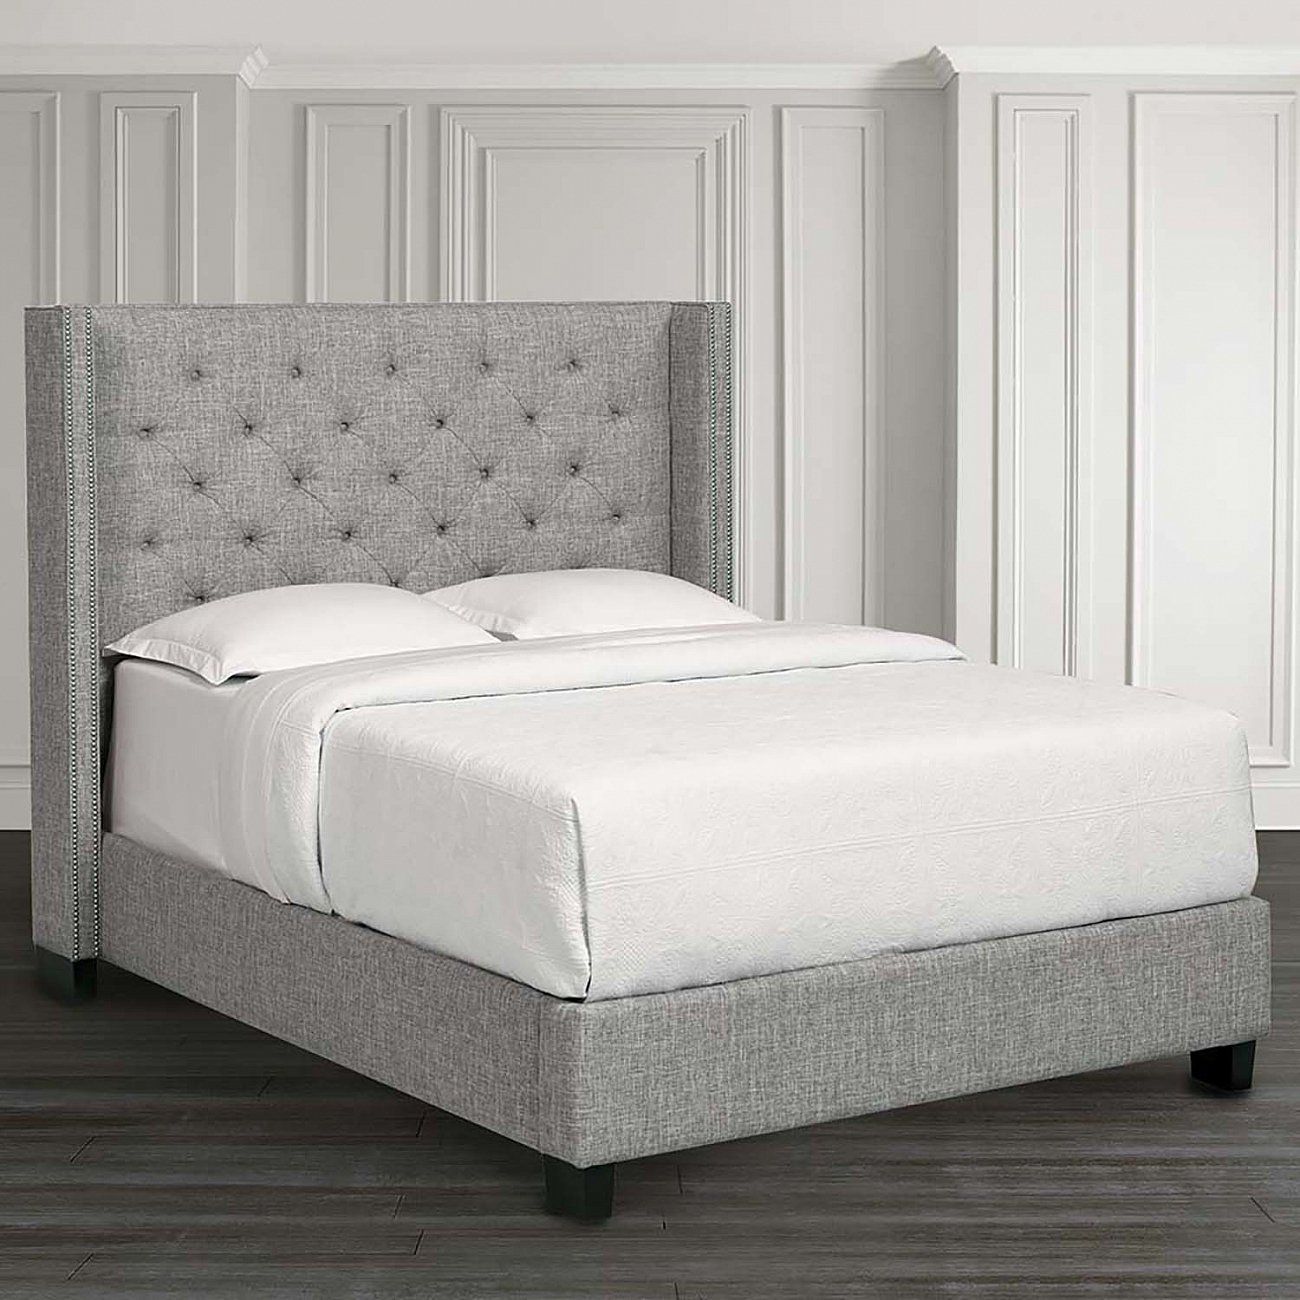 Double bed with upholstered headboard 160x200 cm cream Wing